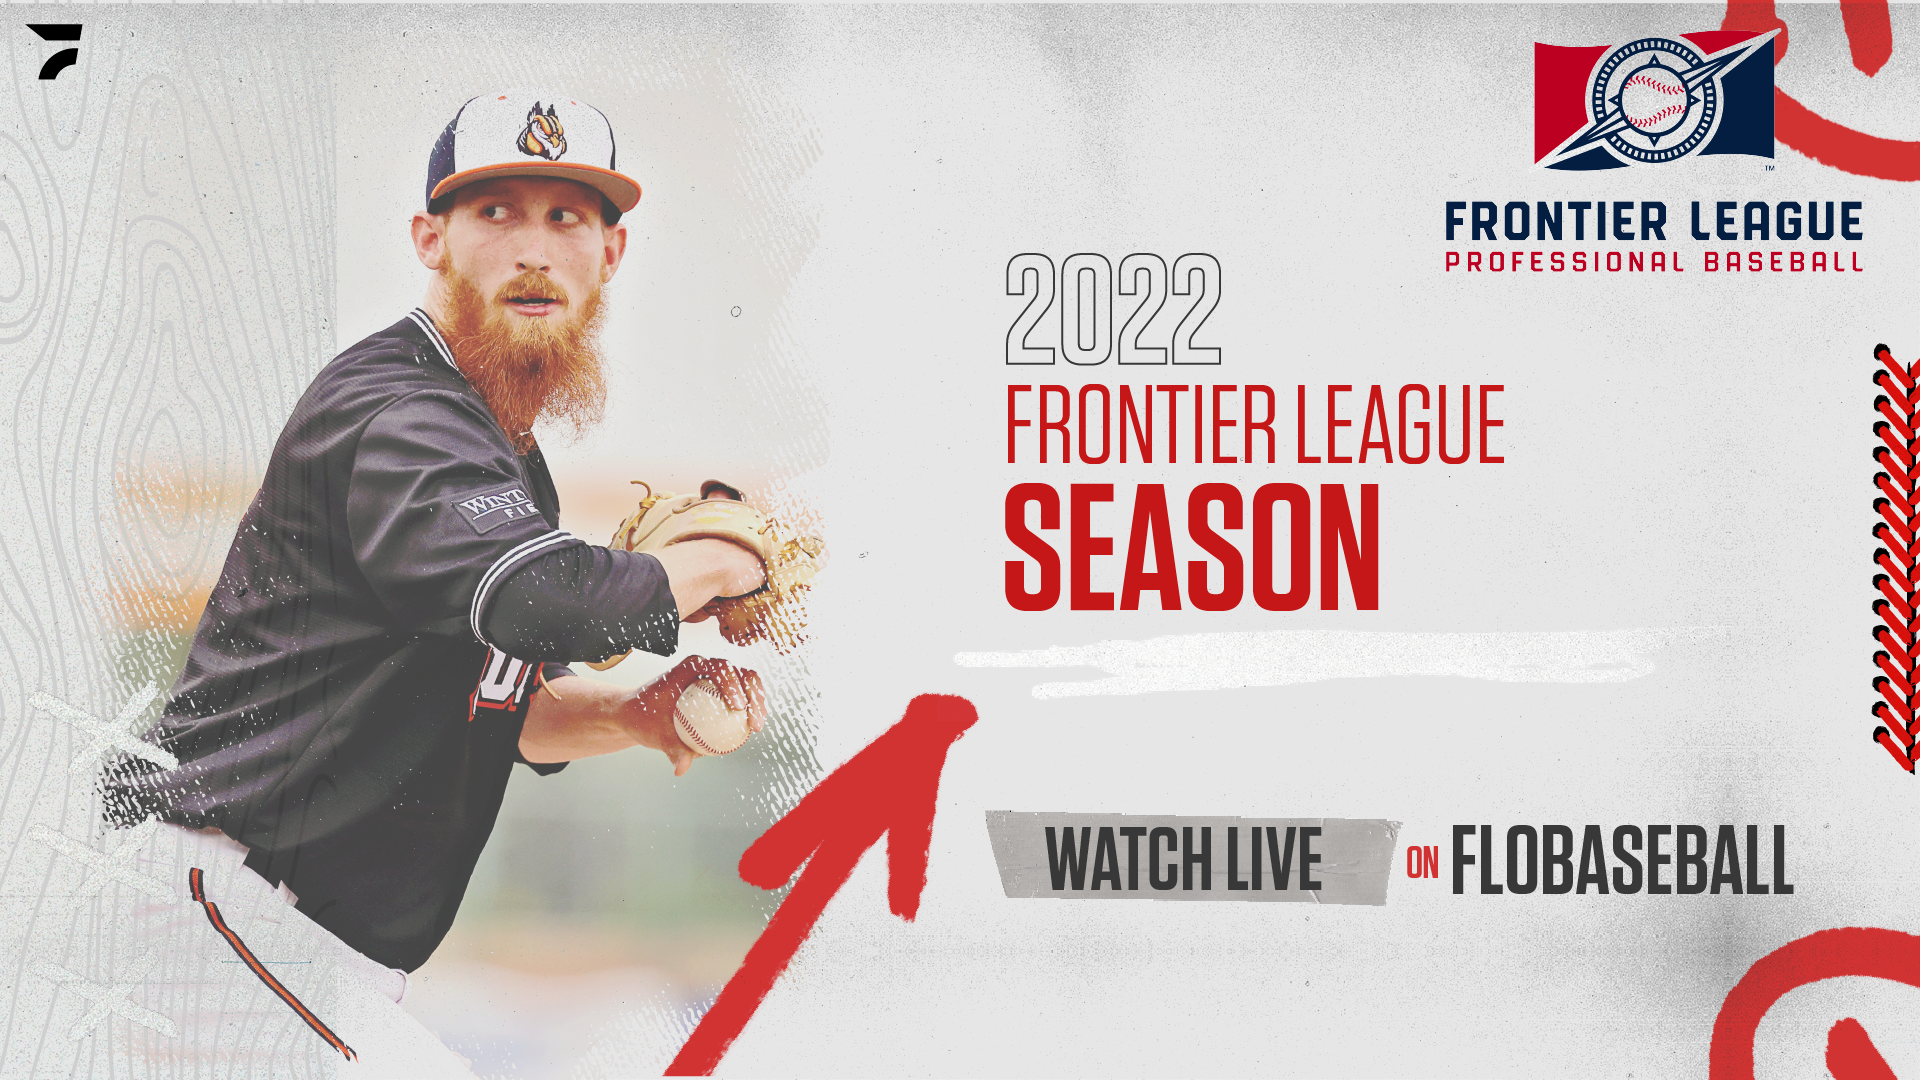 FRONTIER LEAGUE AND FLOSPORTS ANNOUNCE LANDMARK STREAMING RIGHTS AGREEMENT